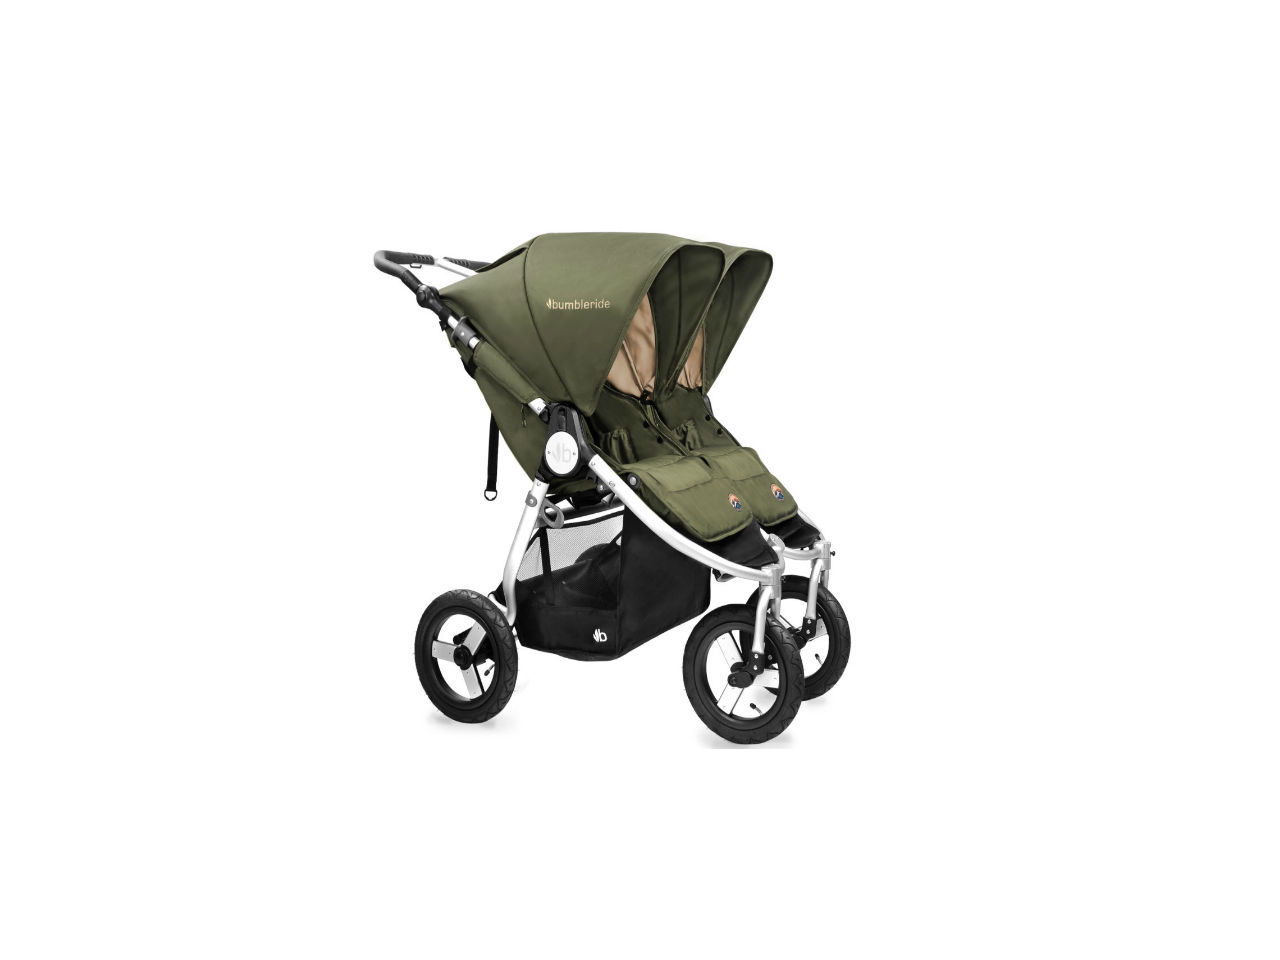 bumbleride double stroller used